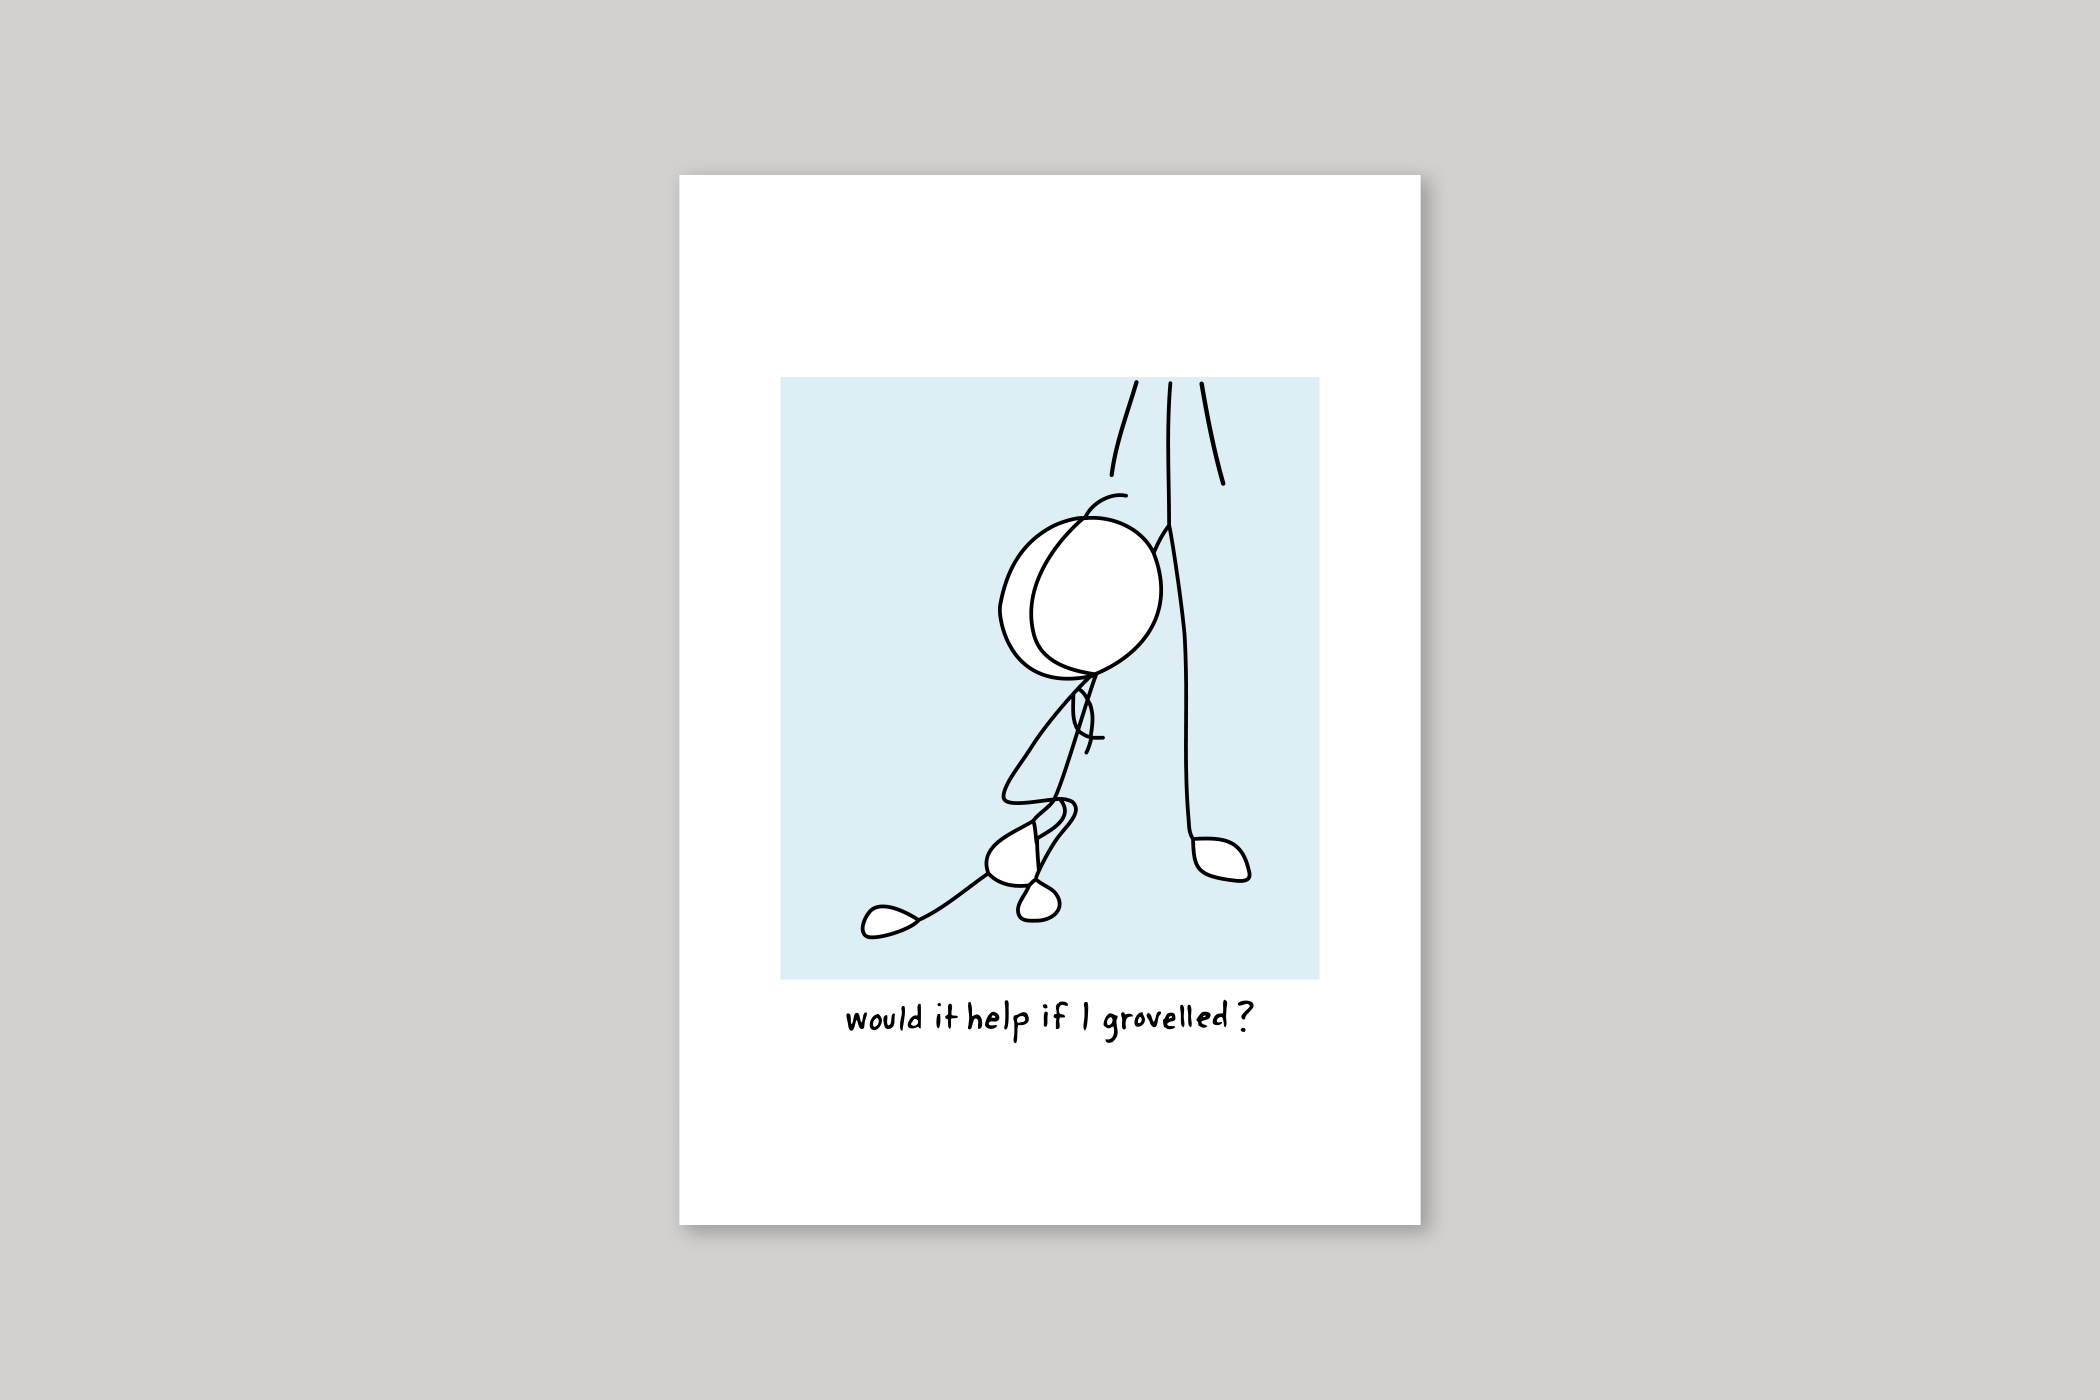 Would It Help If I Grovelled? sorry card humorous illustration from Mean Cards range of greeting cards by Icon.